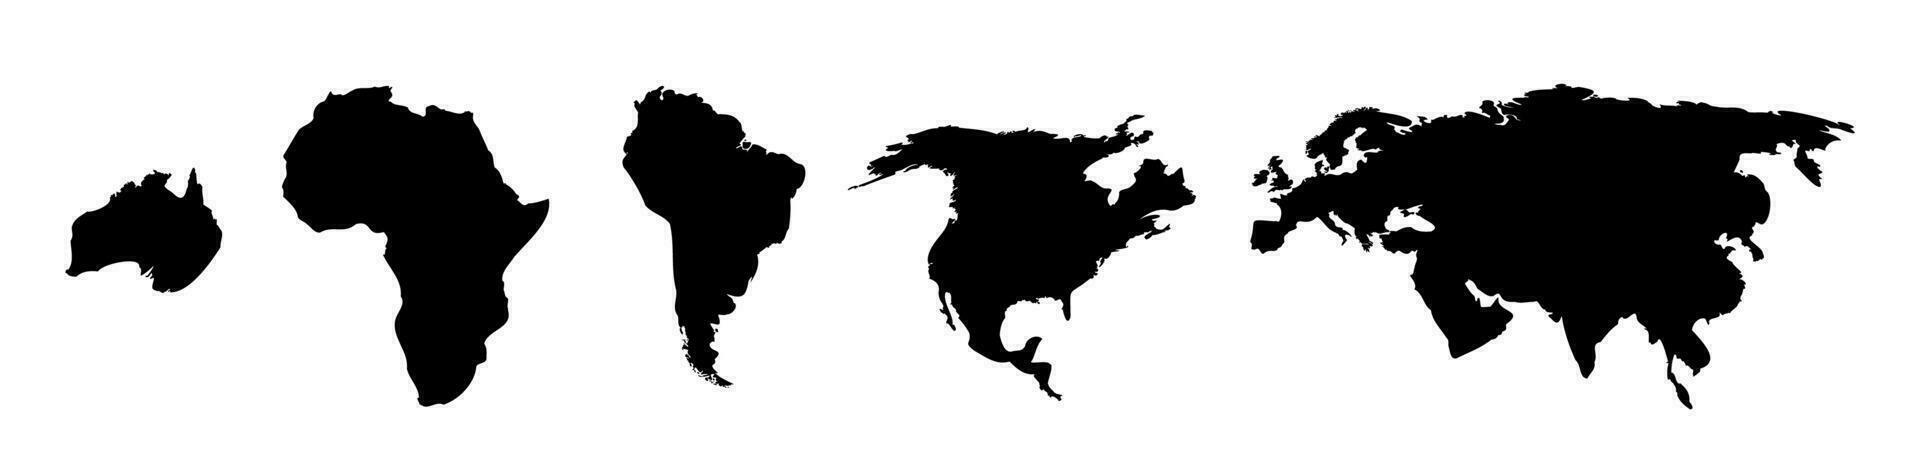 Black continents set. Global abstract cartography atlas for geographical europe study and travel america with creative vector africa topography